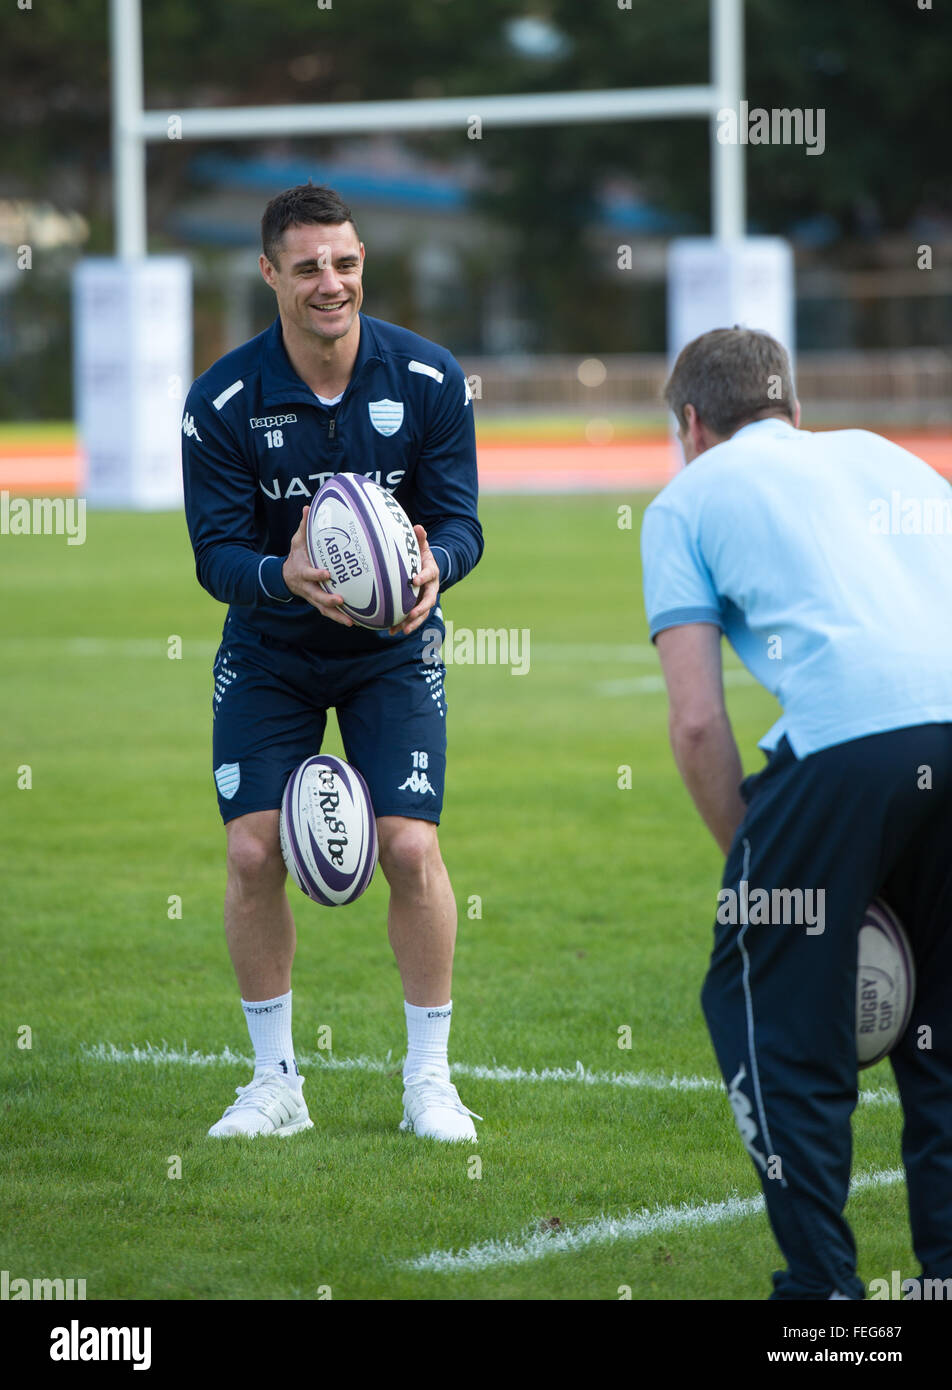 Hong Kong, Hong Kong S.A.R, China. 5th Feb, 2016. DAN CARTER of the French Rugby union team RACING 92's during last practice session ahead of their clash with New Zealand team, The Highlanders. Racing 92 take the chance to practise on the pitch they will play on in the upcoming match in Hong Kong. They are playing at Sui Sai Wan sports ground in Chai Wan. © Jayne Russell/ZUMA Wire/Alamy Live News Stock Photo